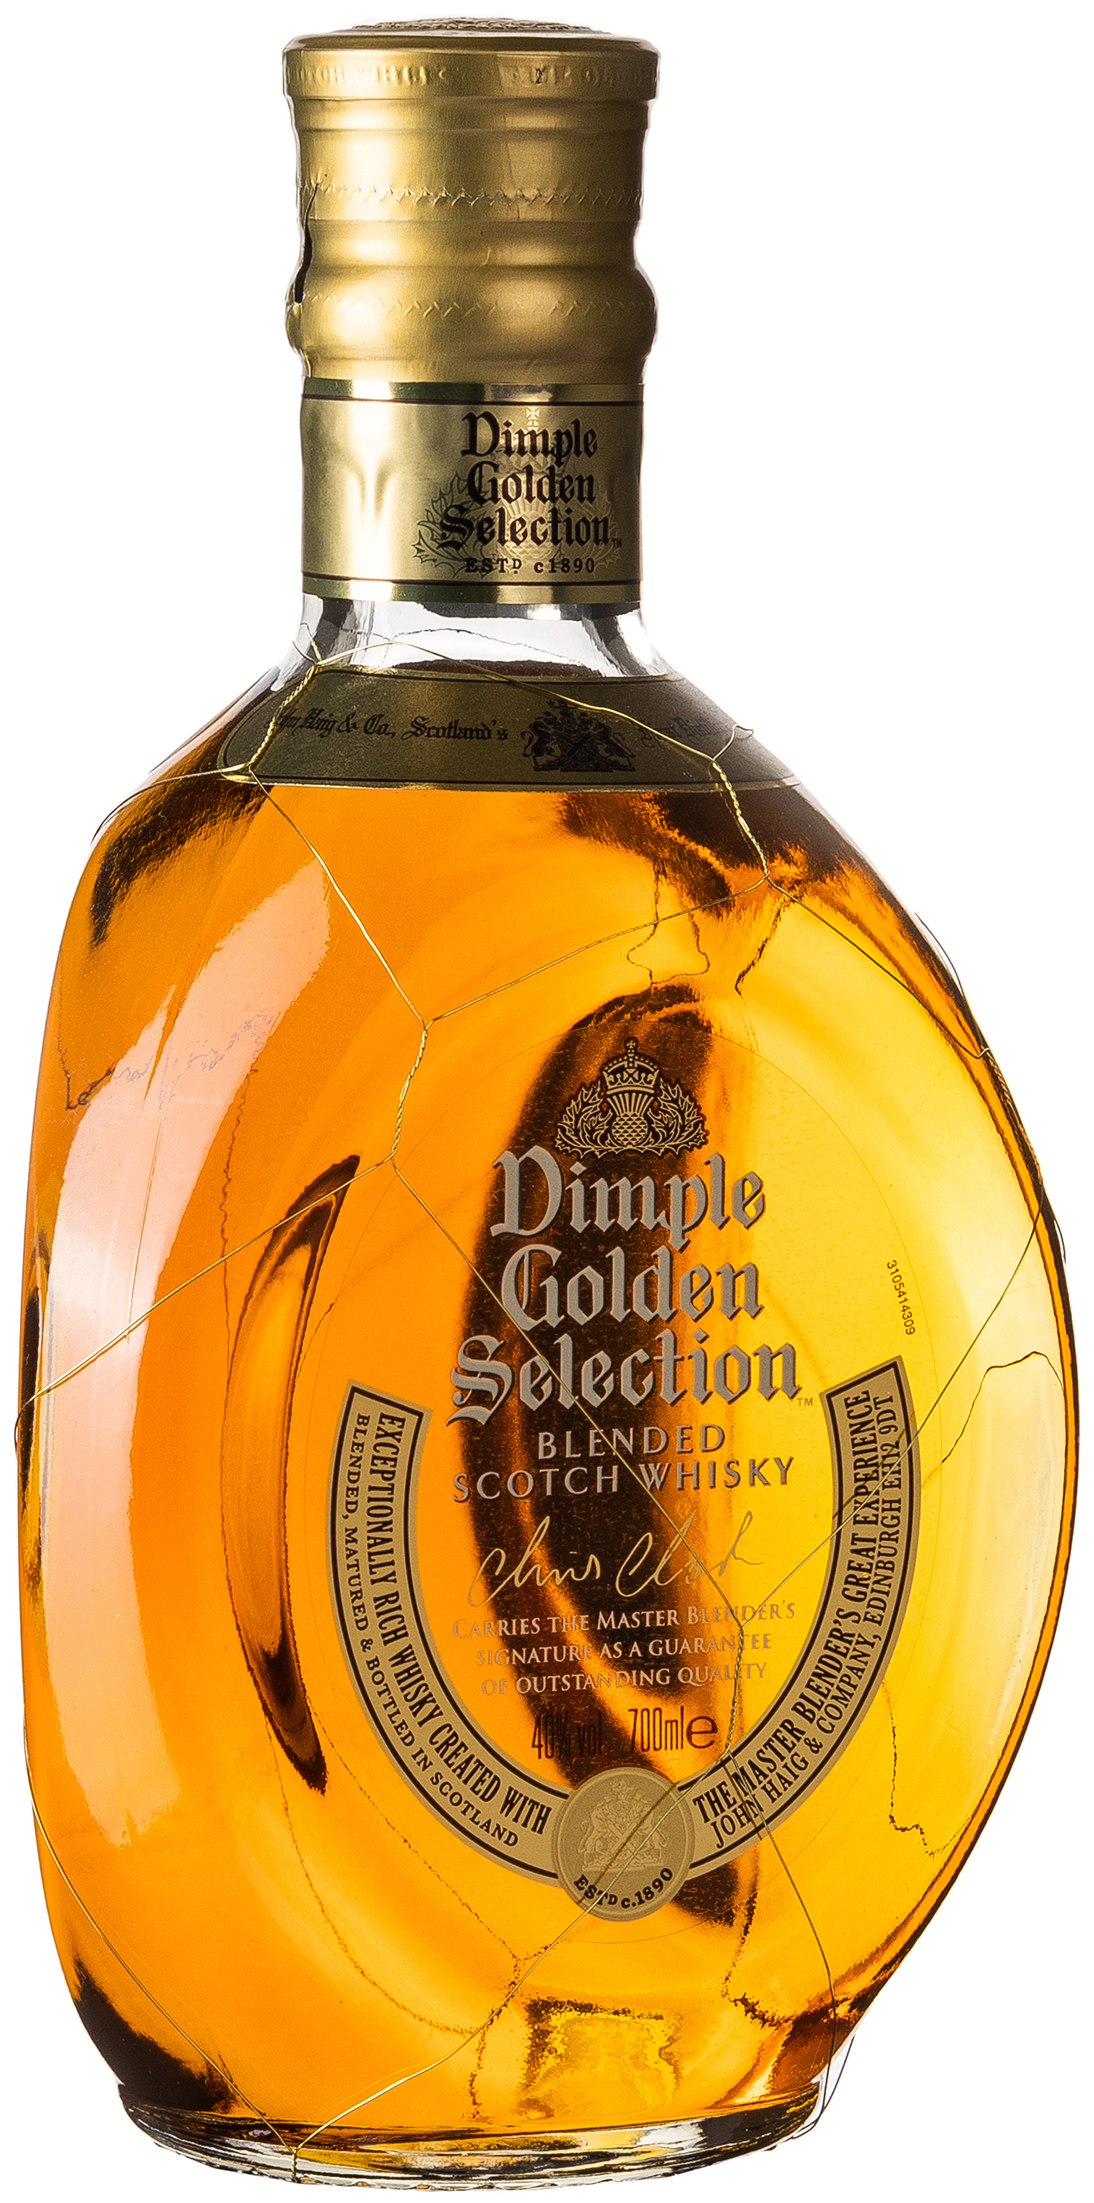 Dimple Gold Selection Whisky Scotch 40% GP blended 0,7L